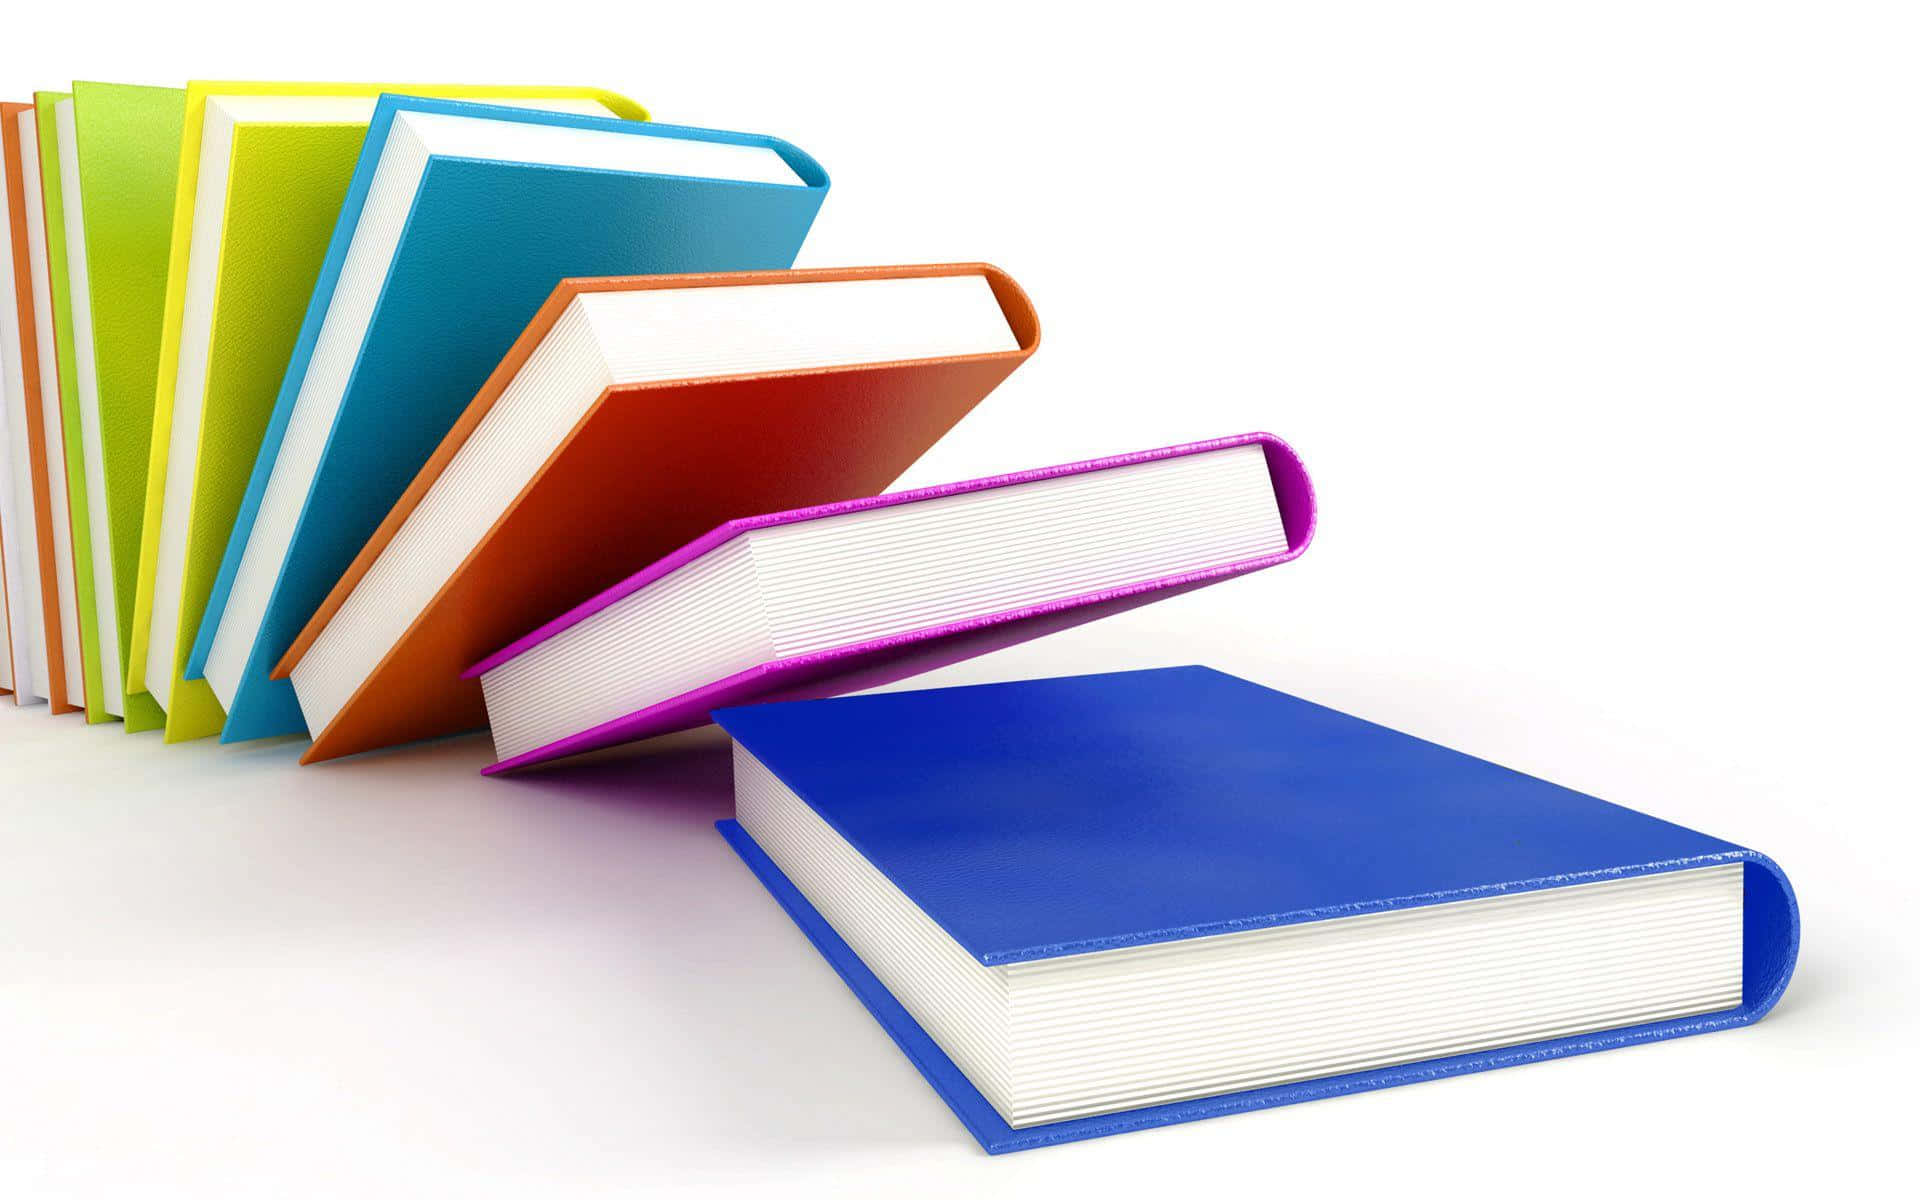 A Stack Of Colorful Books On A White Background